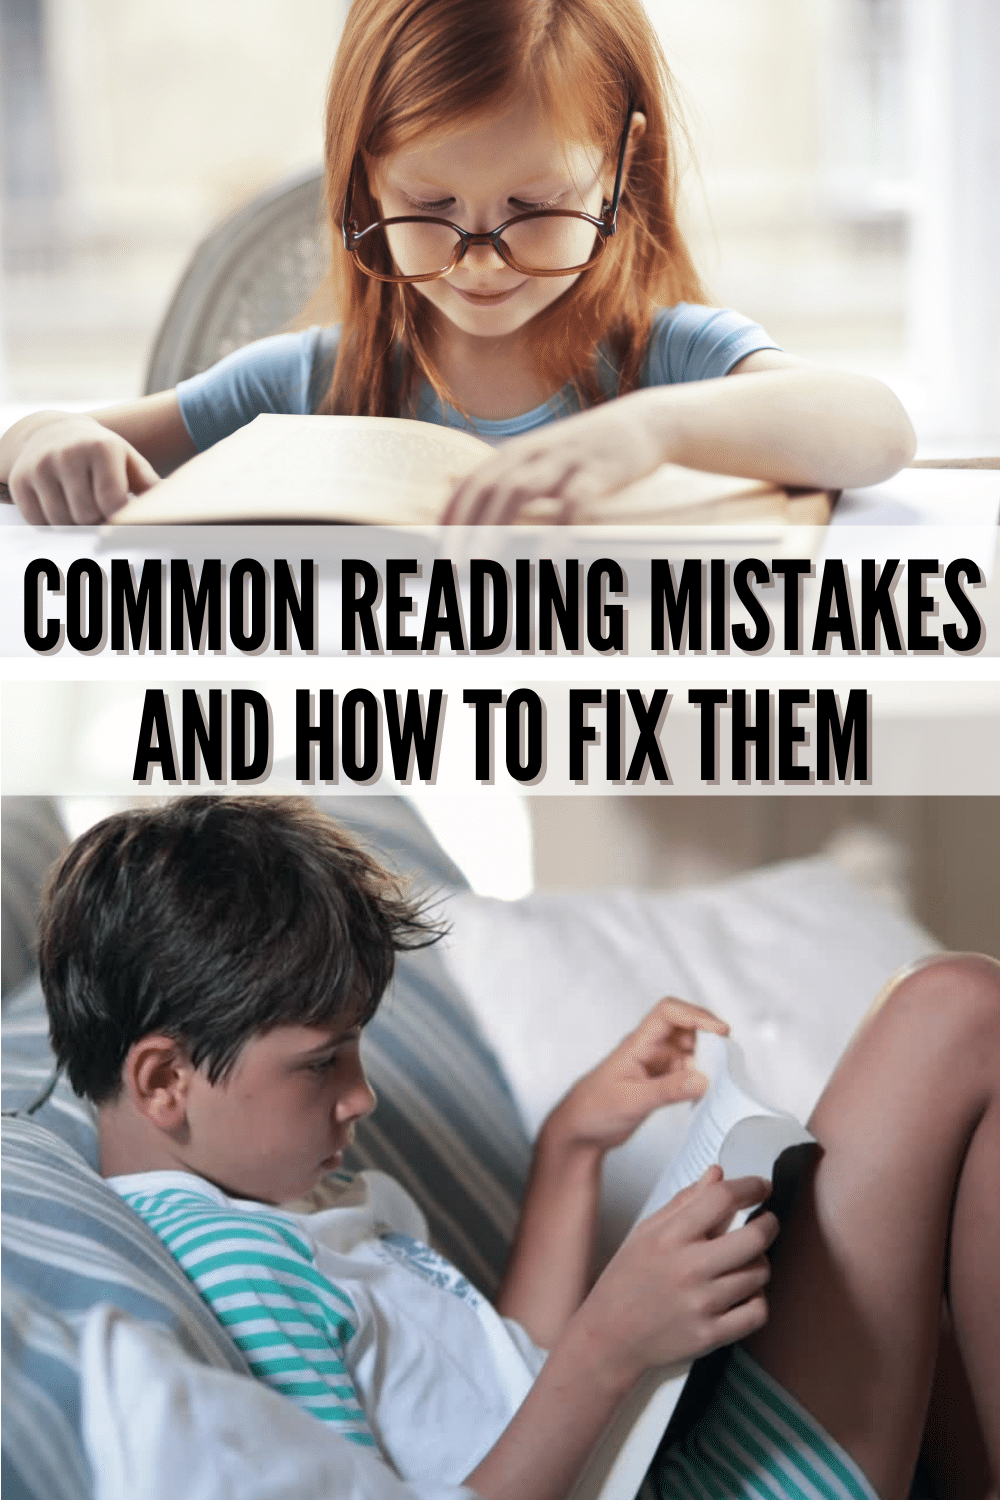 Reading is a challenge for a lot of young children. Here are some of the more common reading mistakes, and how to fix them. #parentingtips #reading #LearningToRead #teachingkids via @wondermomwannab